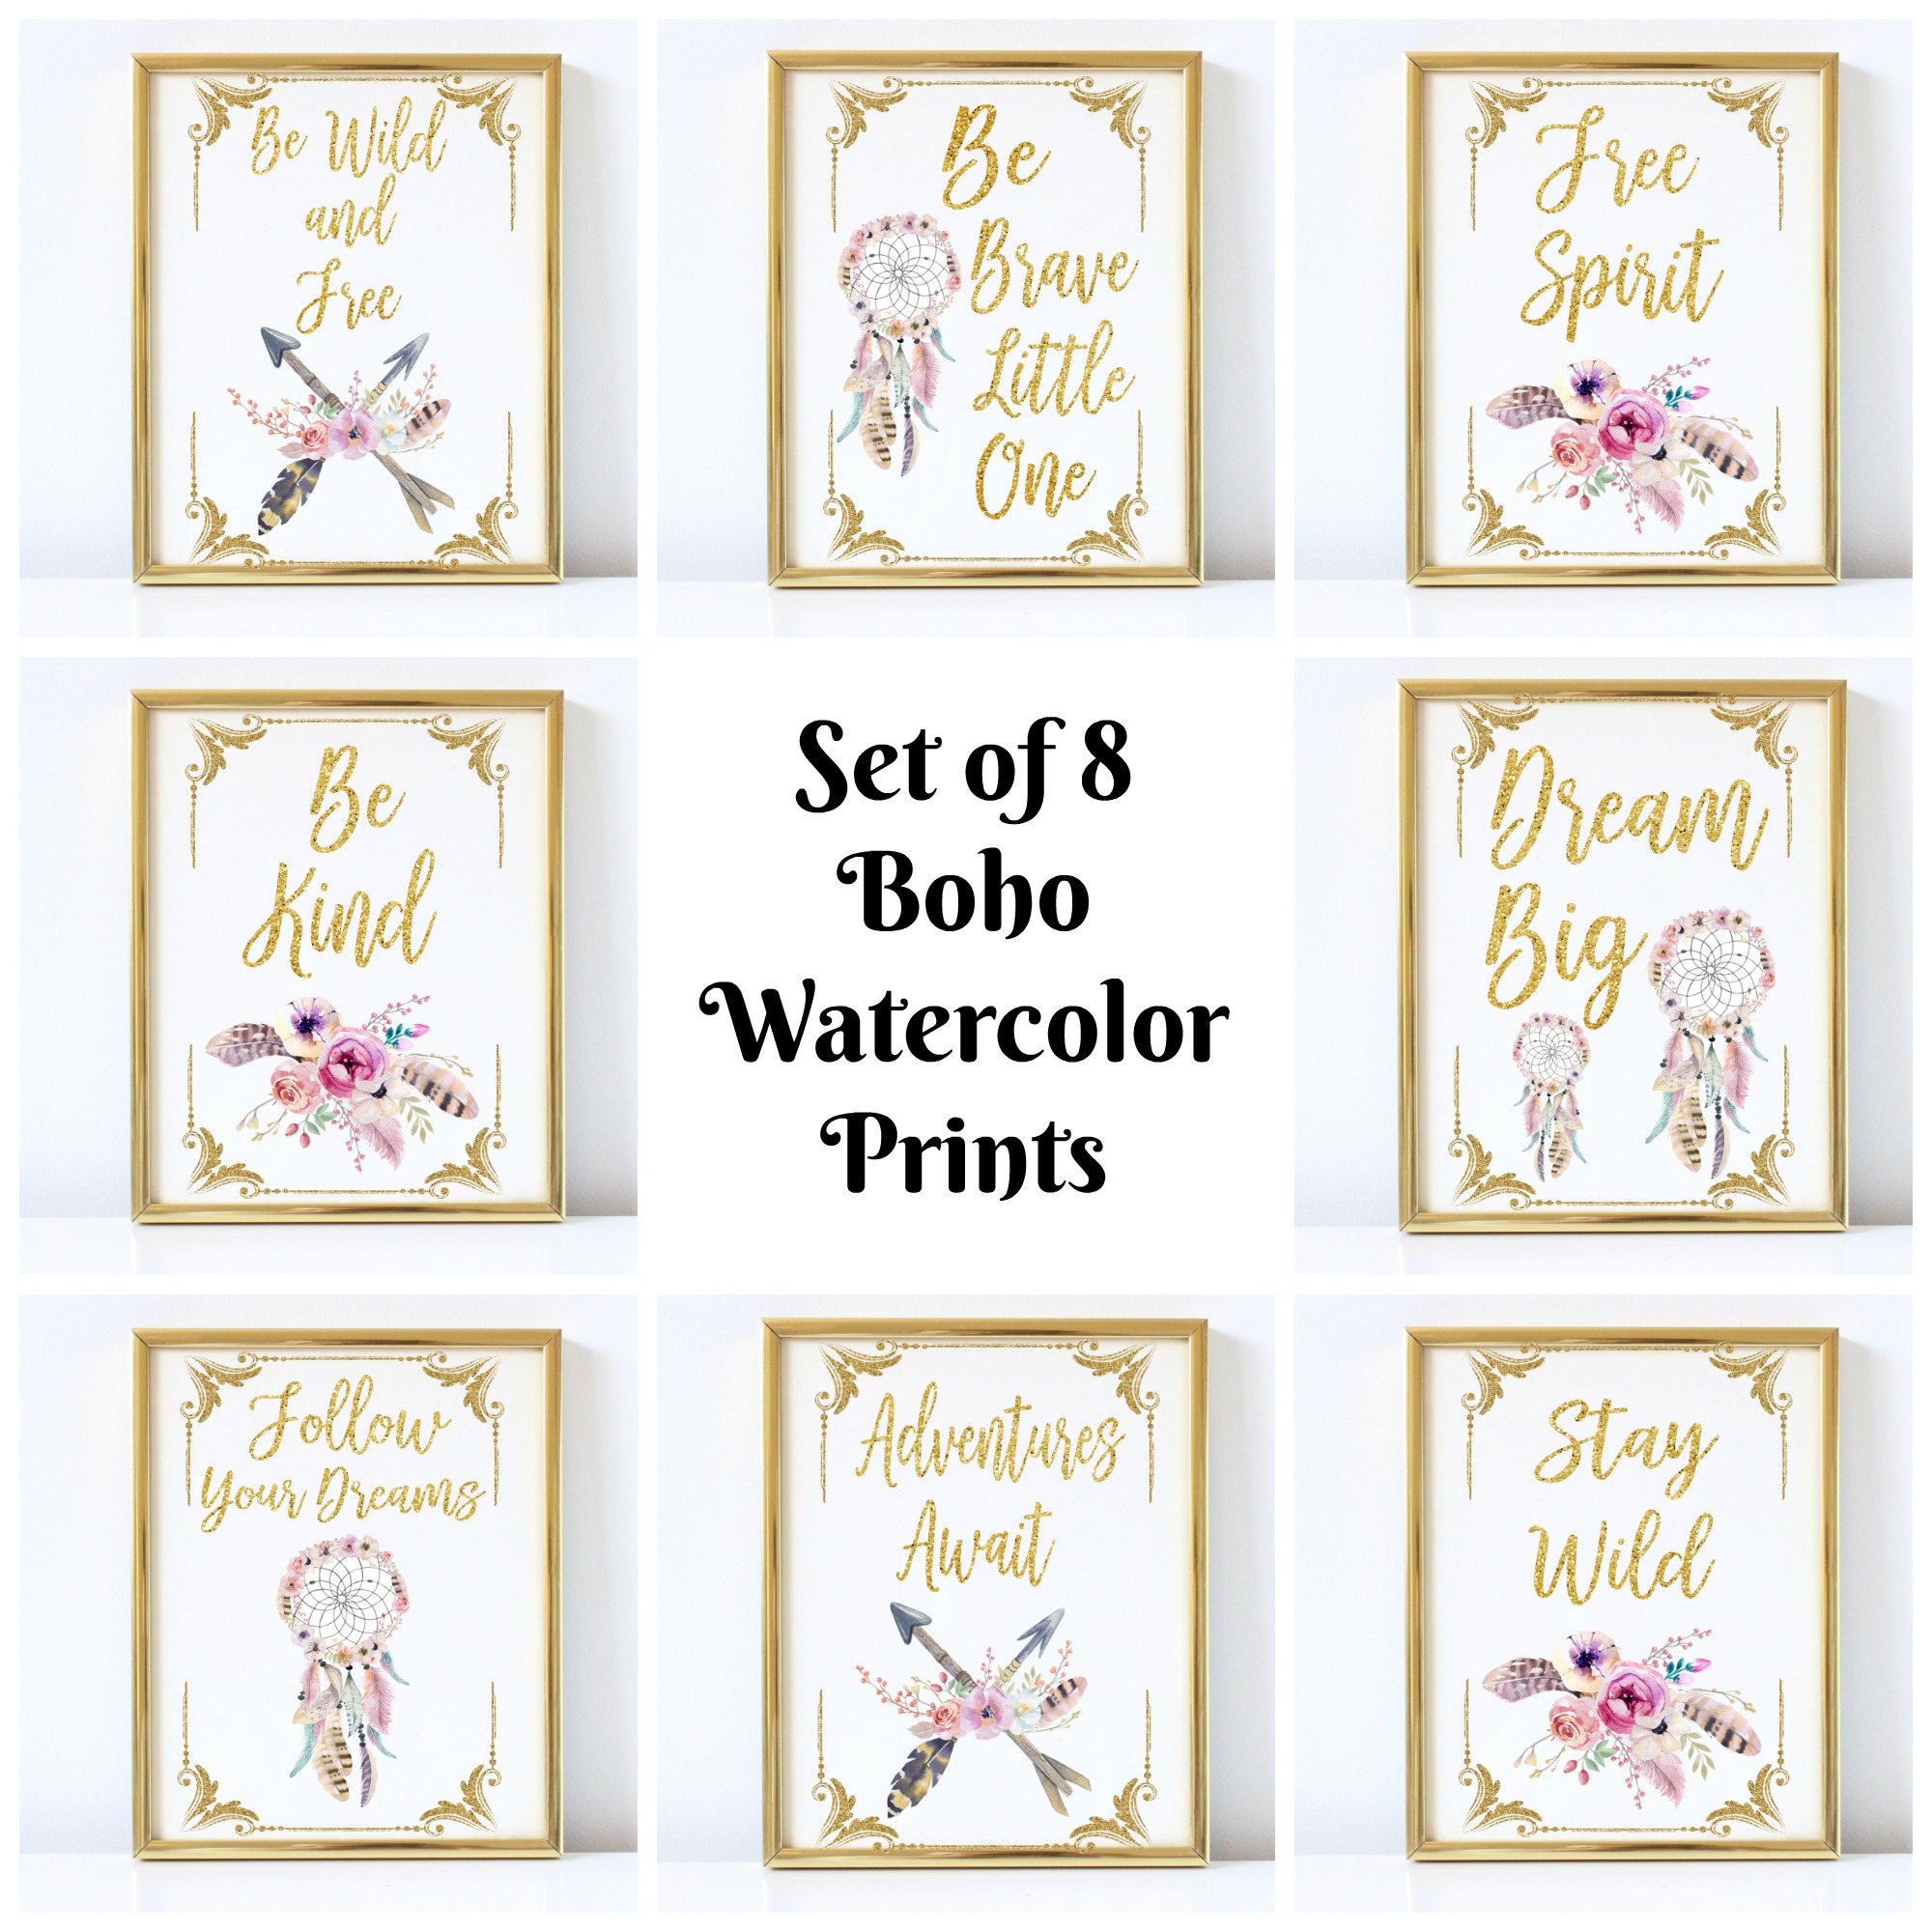 A collage of 8 watercolor bobo-themed prints, each in a gold frame with gold lettering and a colorful watercolor design.